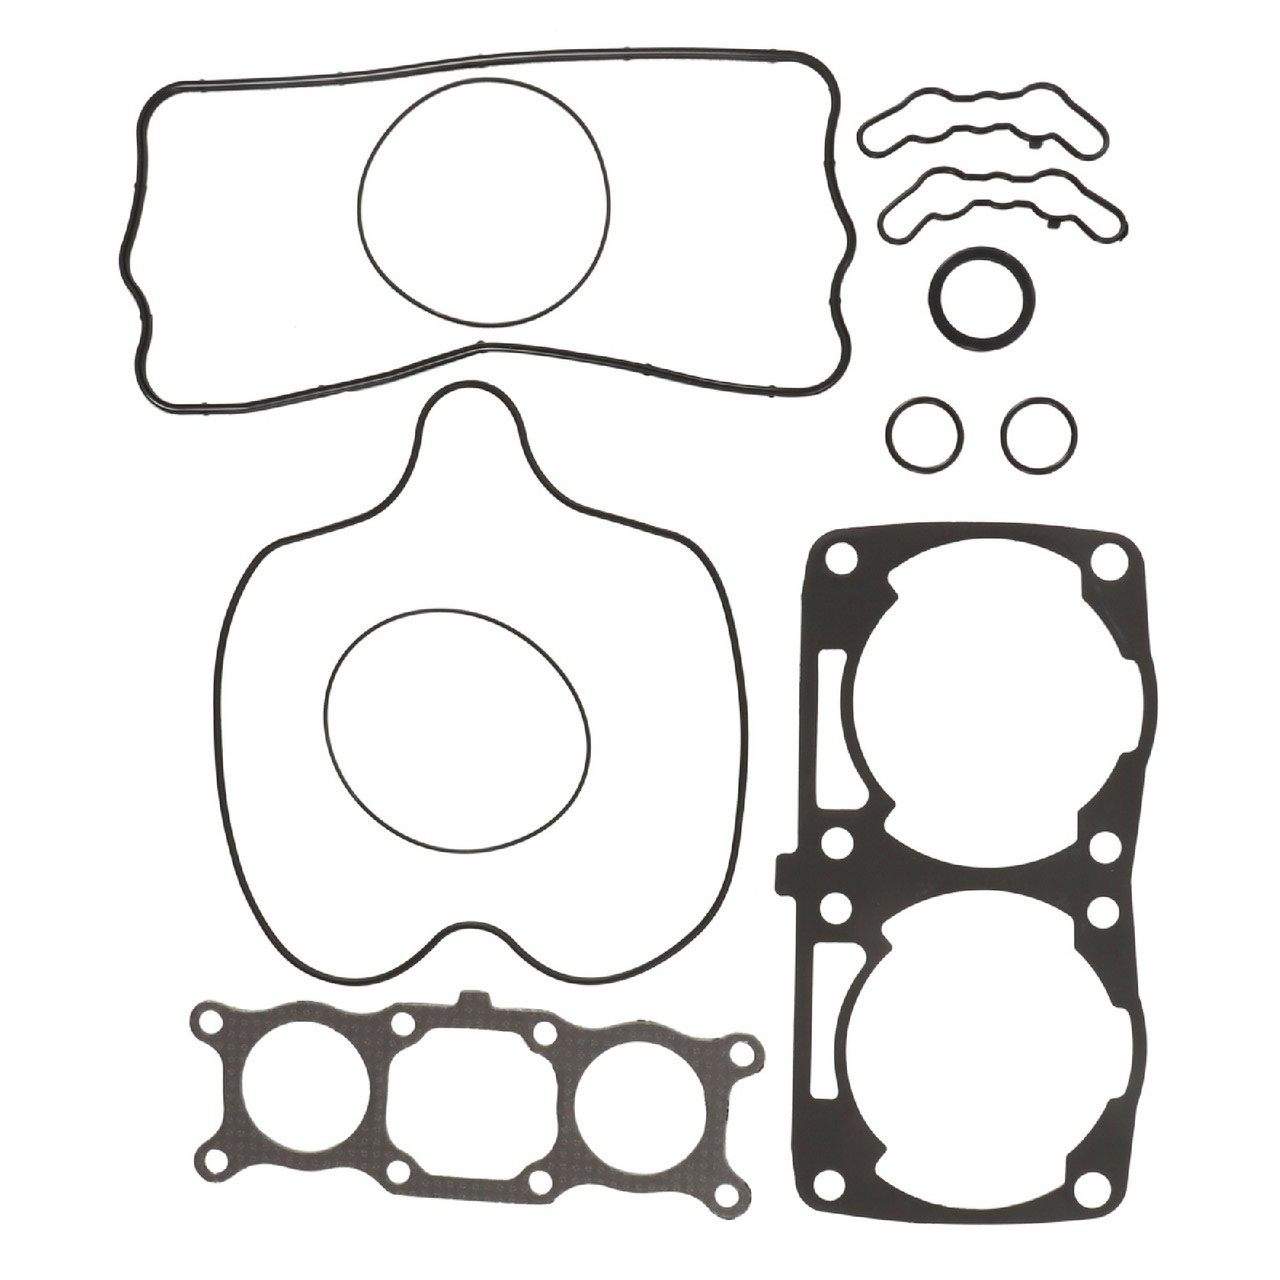 Top End Gasket Set - Polaris (800 AXYS/Switchback/Rush 18) - Click Image to Close